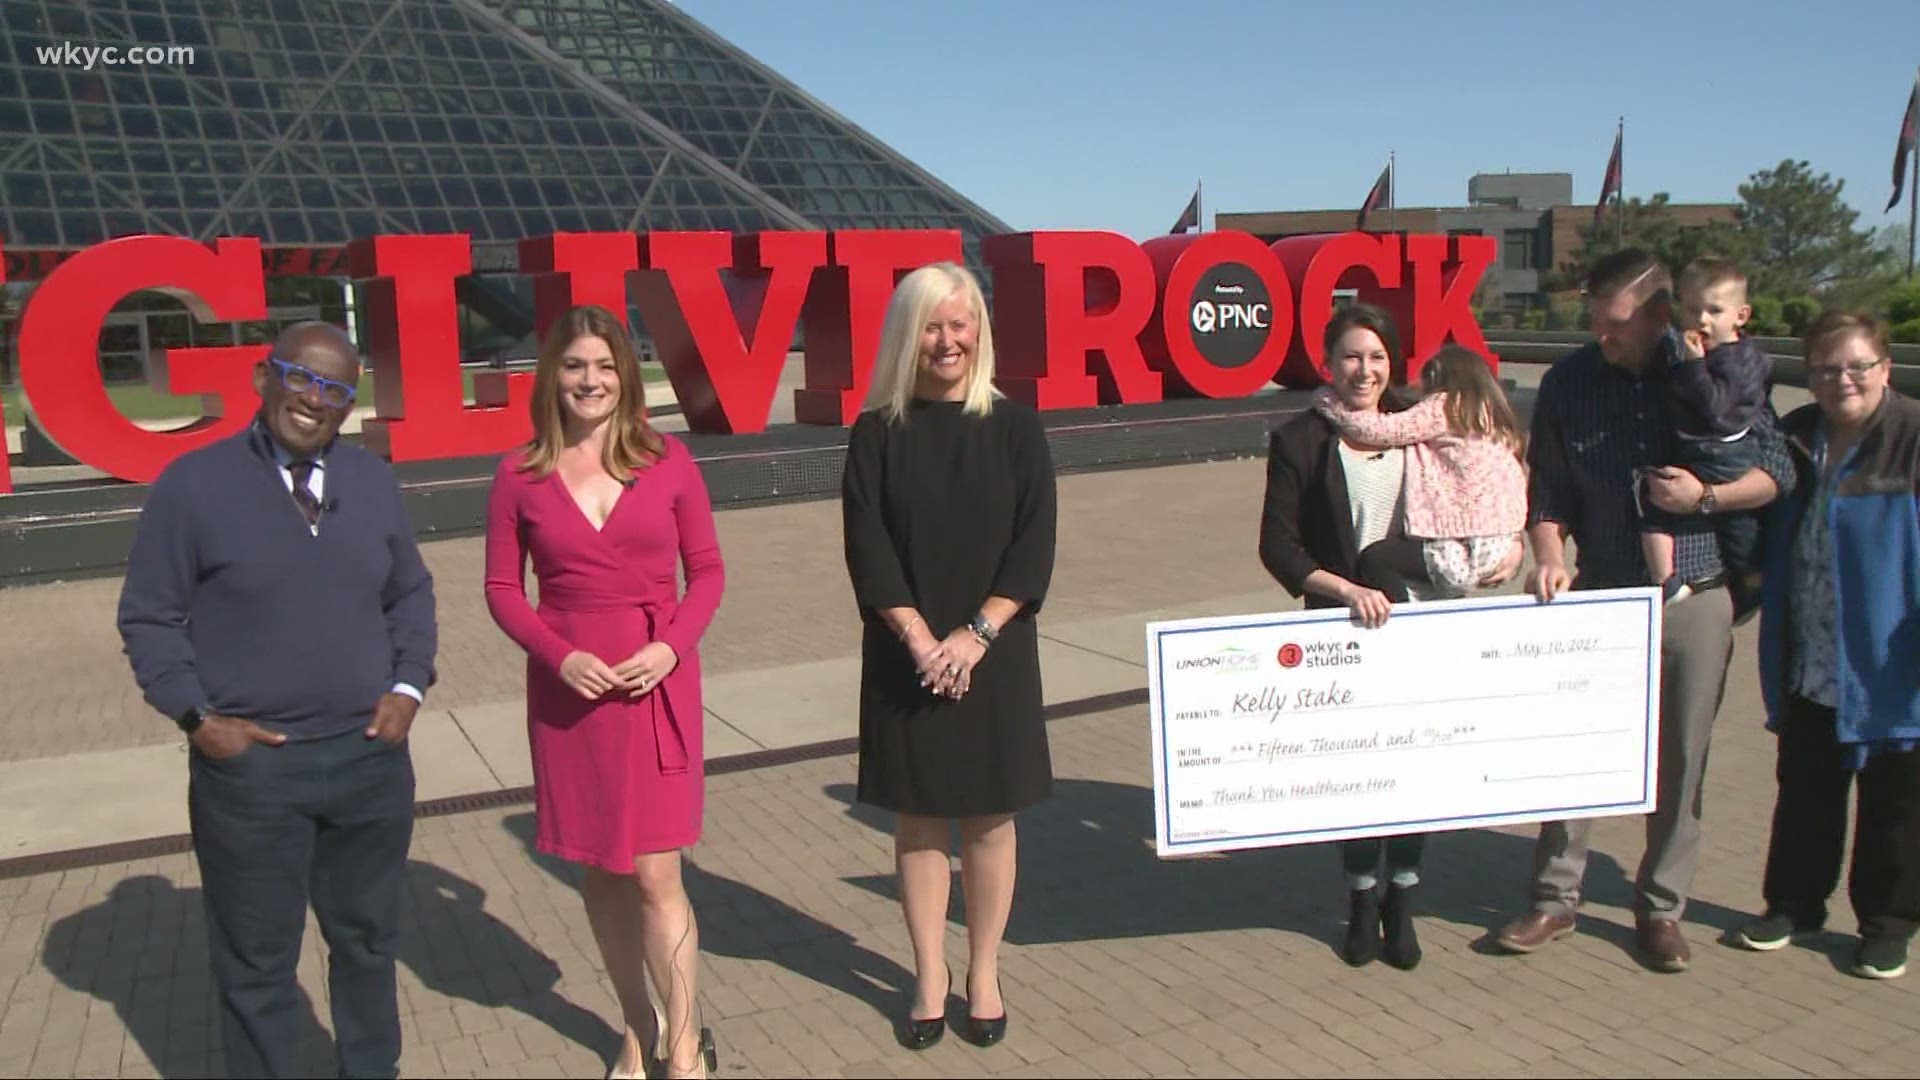 It was a special moment as nurse Kelly Stake, who works in the COVID unit at Cleveland Clinic Hillcrest Hospital, was surprised with a check for $15,000.